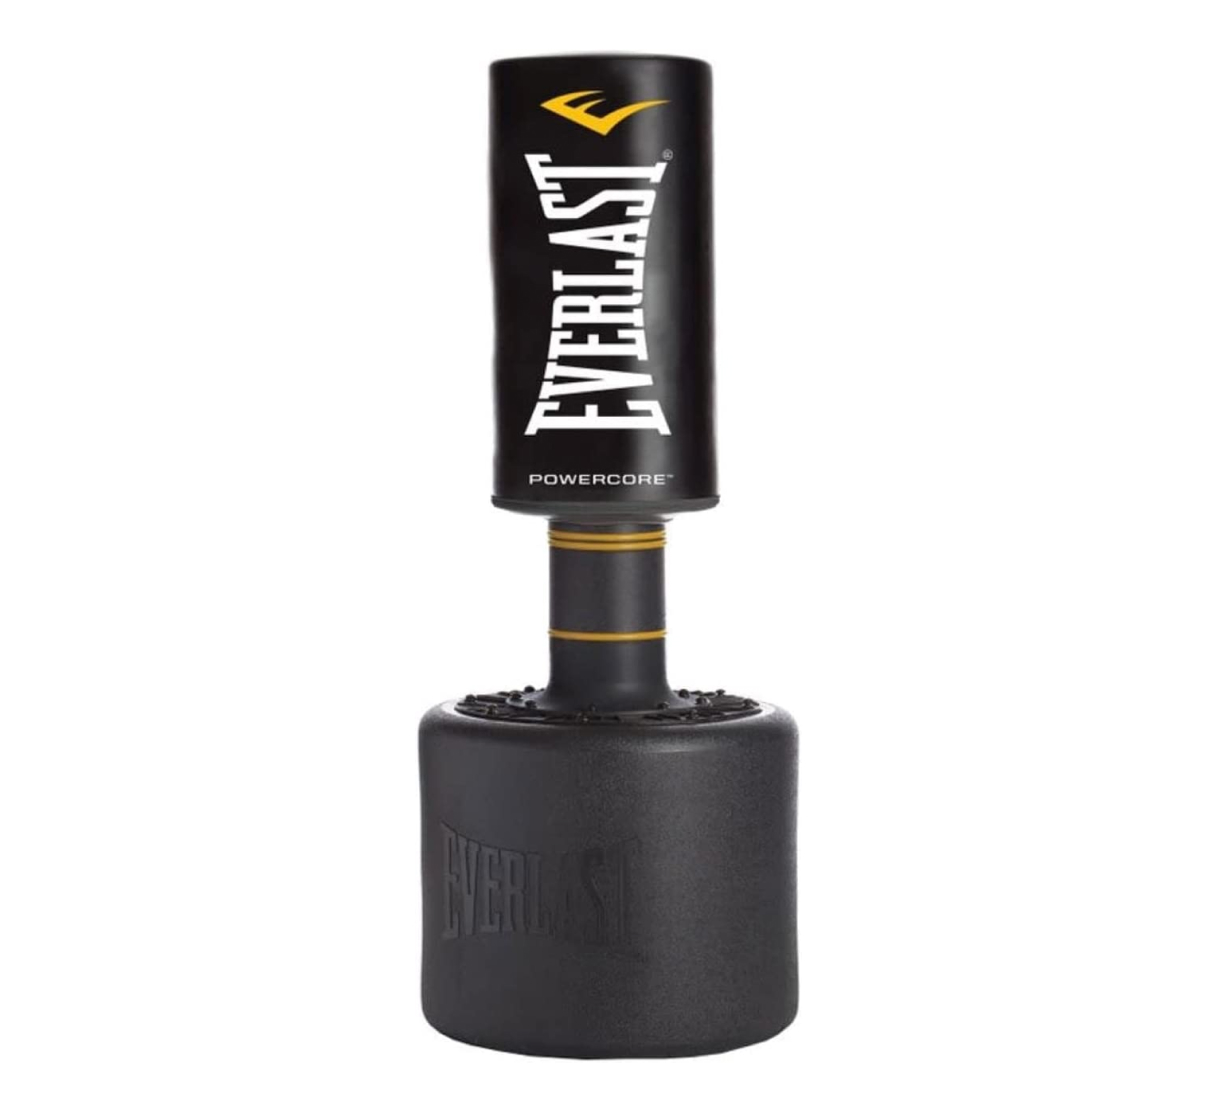 Everlast Power Core Bag for shadow boxing